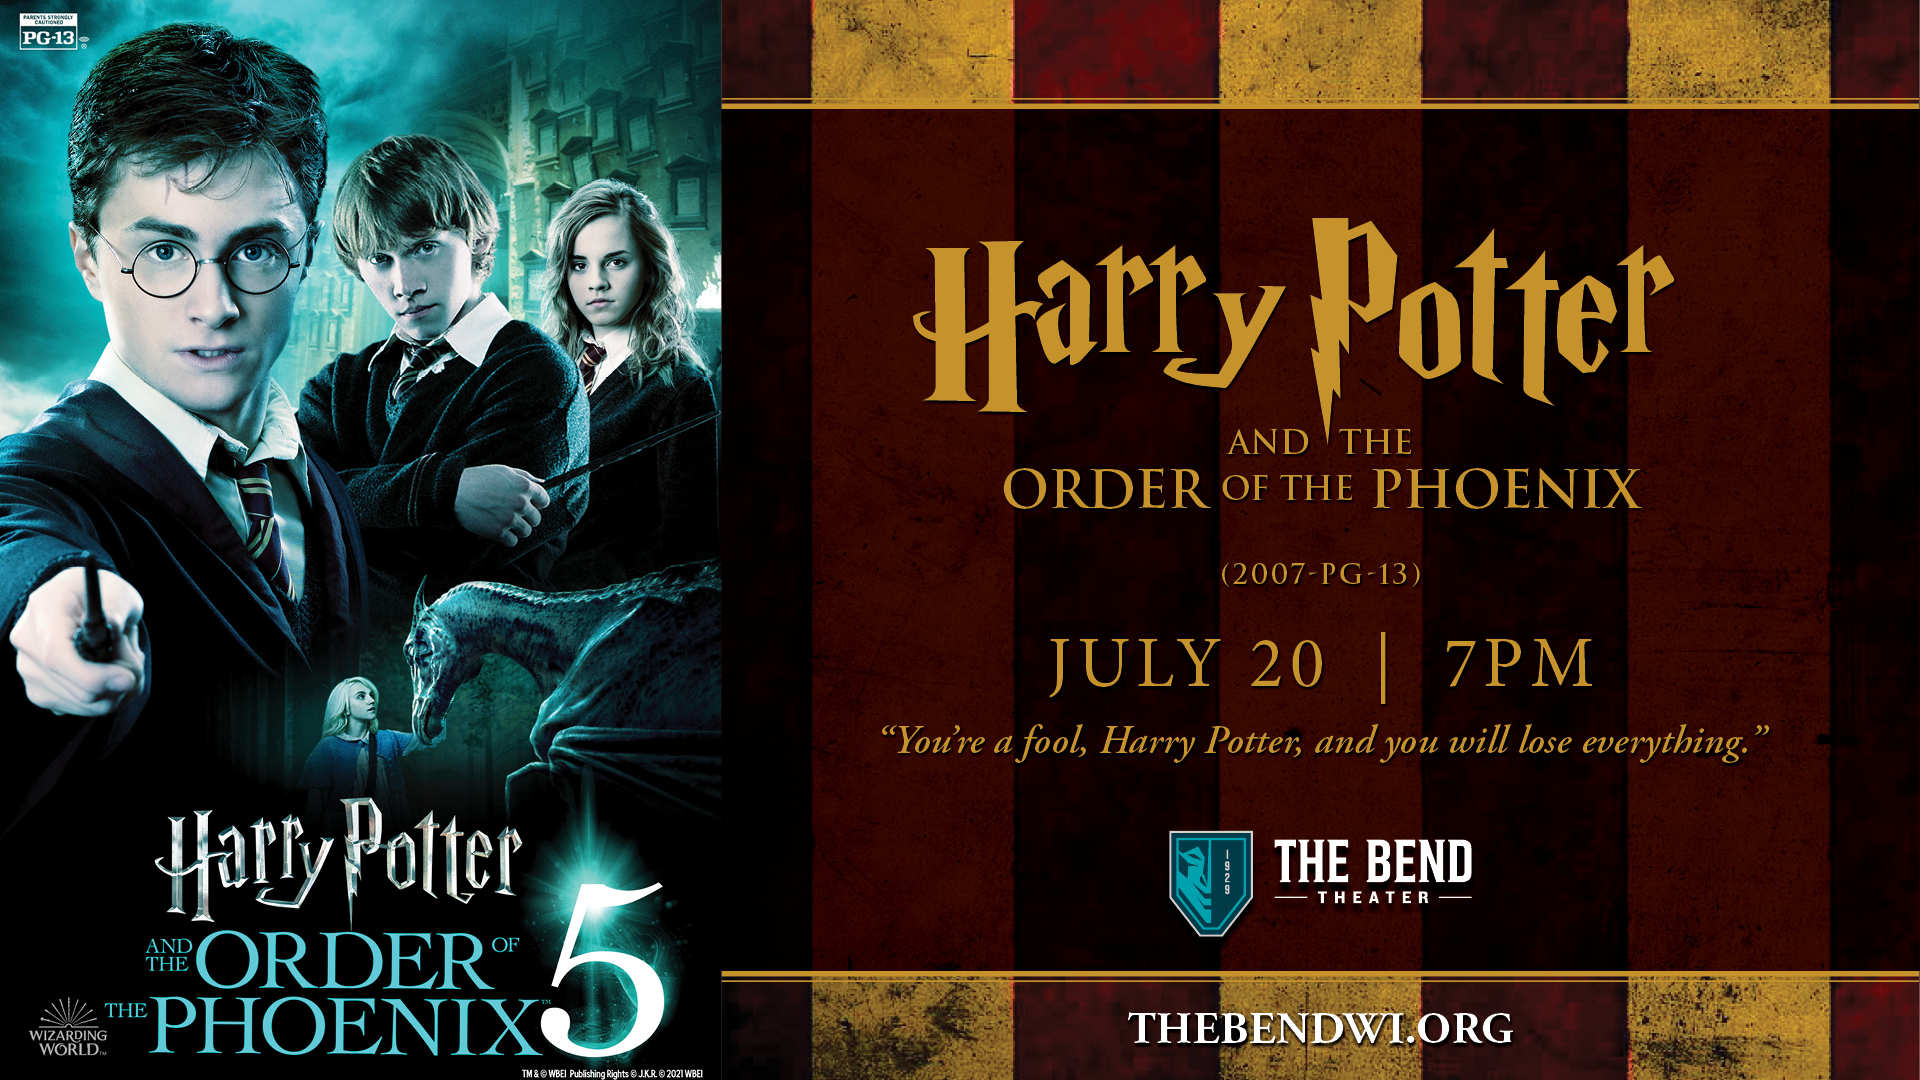 The Bend Theater presents Harry Potter and The Order of the Phoenix